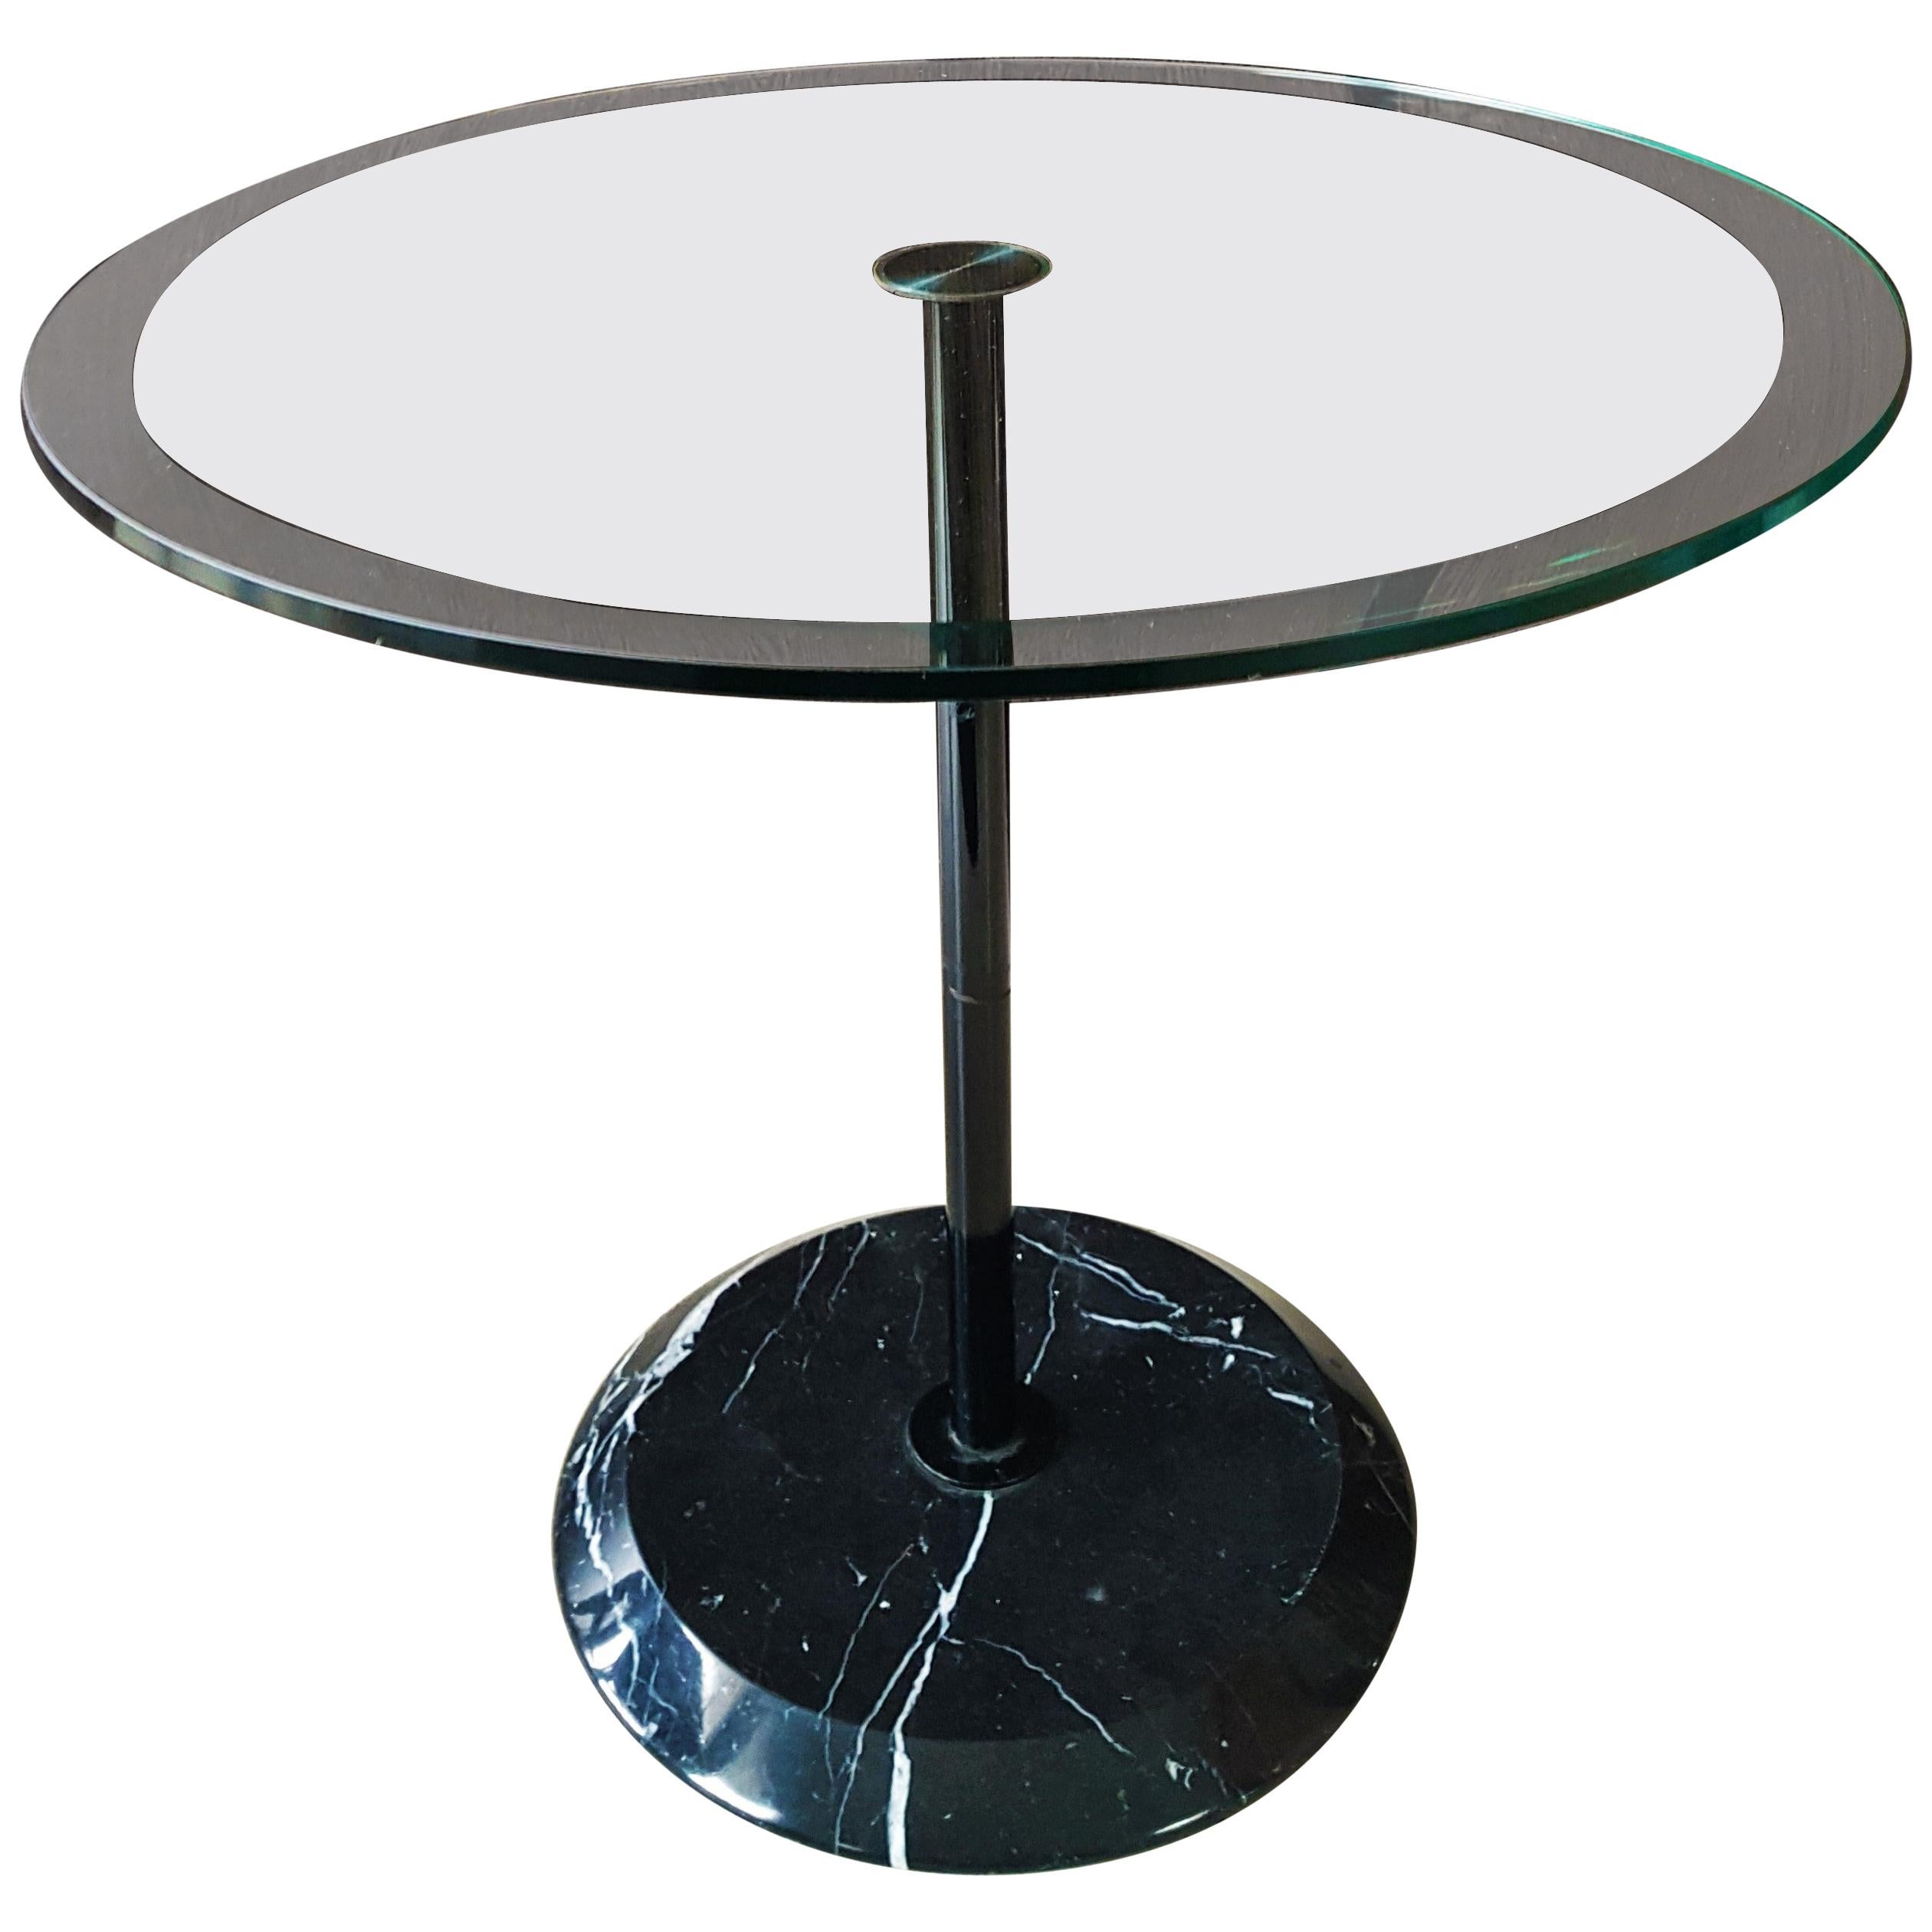 Midcentury Magistretti for Cattelan Marble Glass Side Coffee Table, Italy, 1980